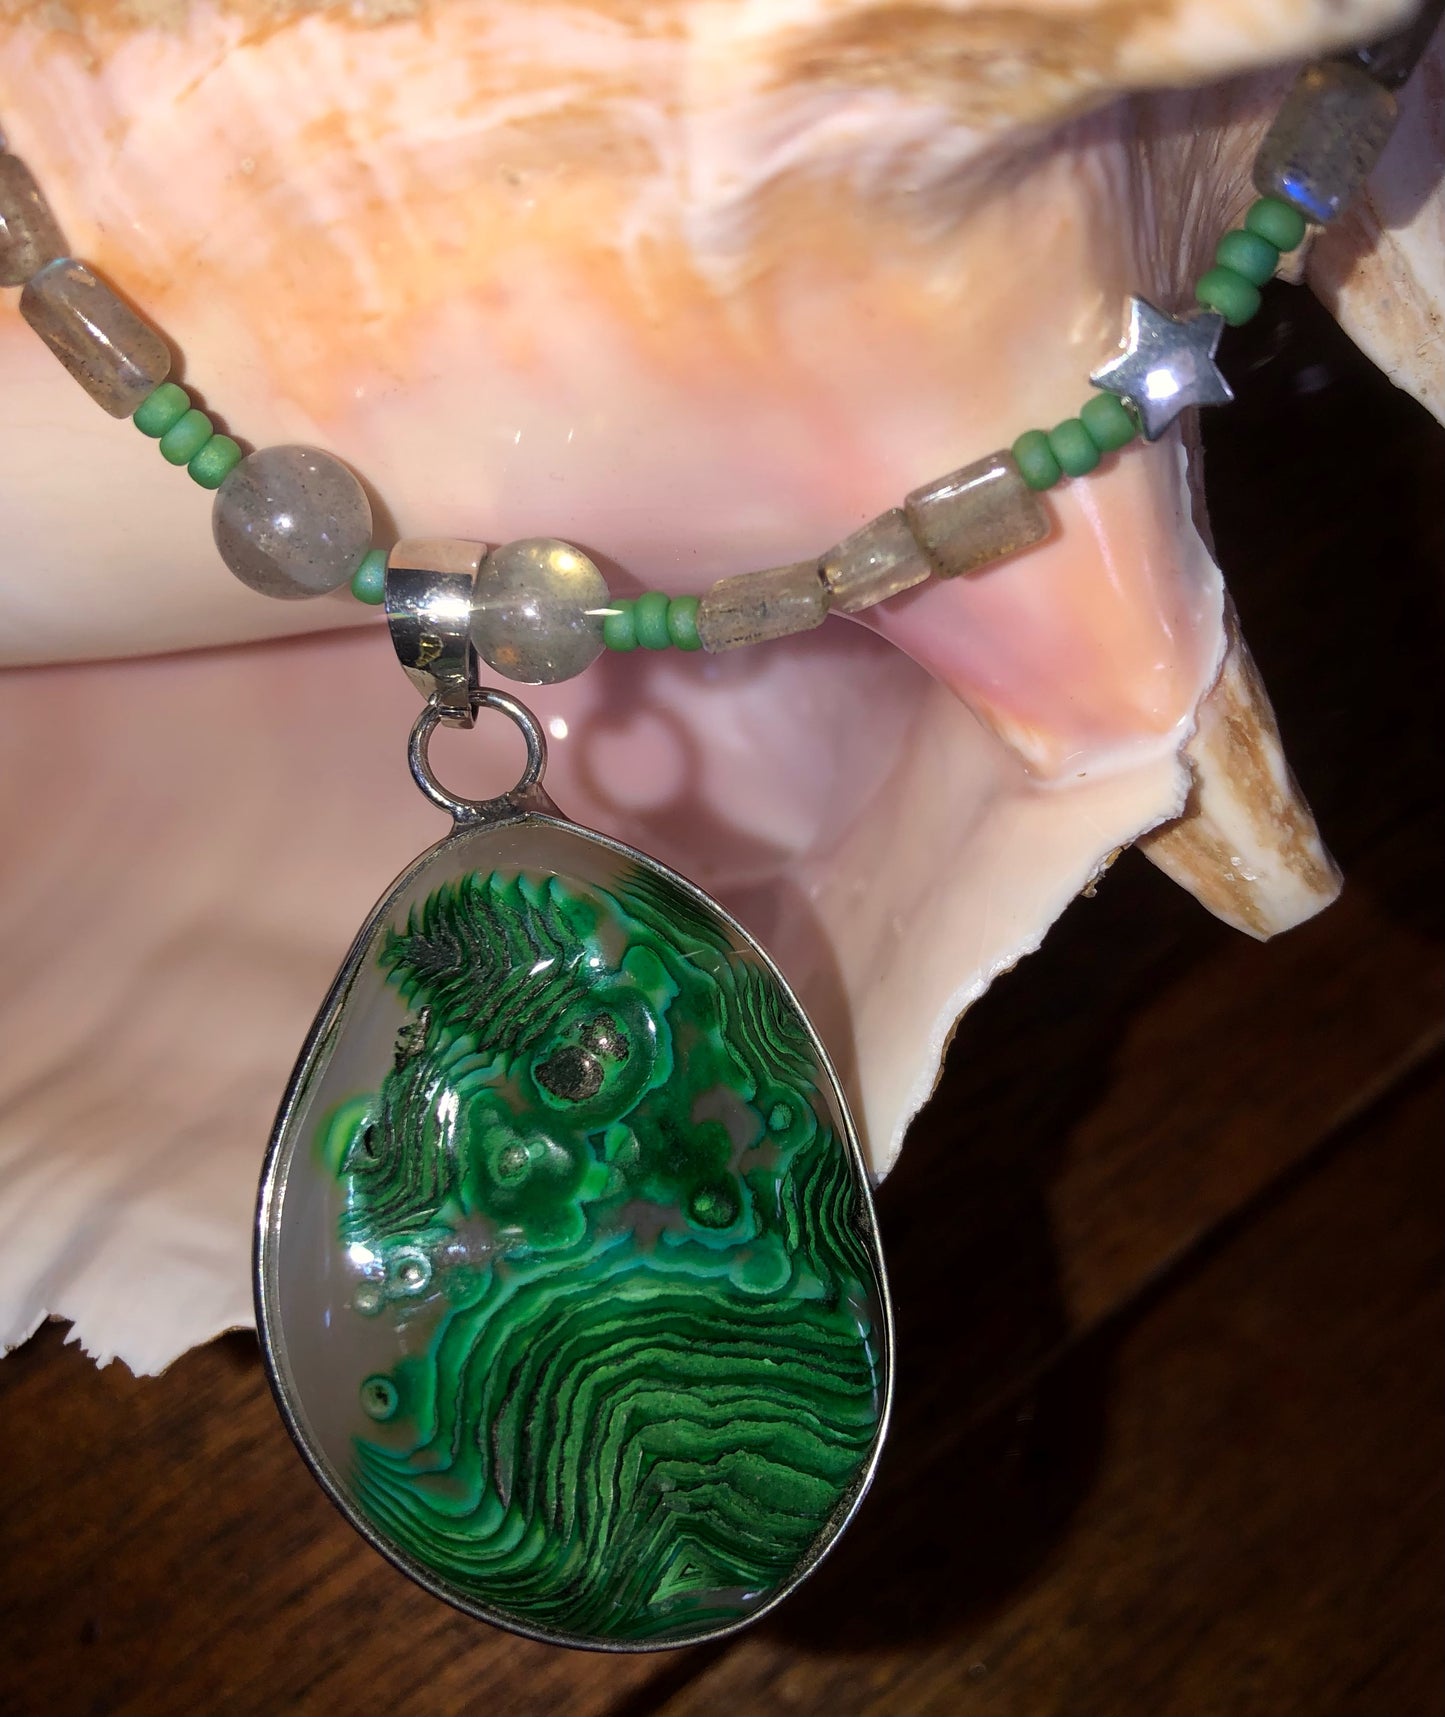 Green moss agate necklace with labradorite beads, green glass seed beads, and silver plated fish clasp.